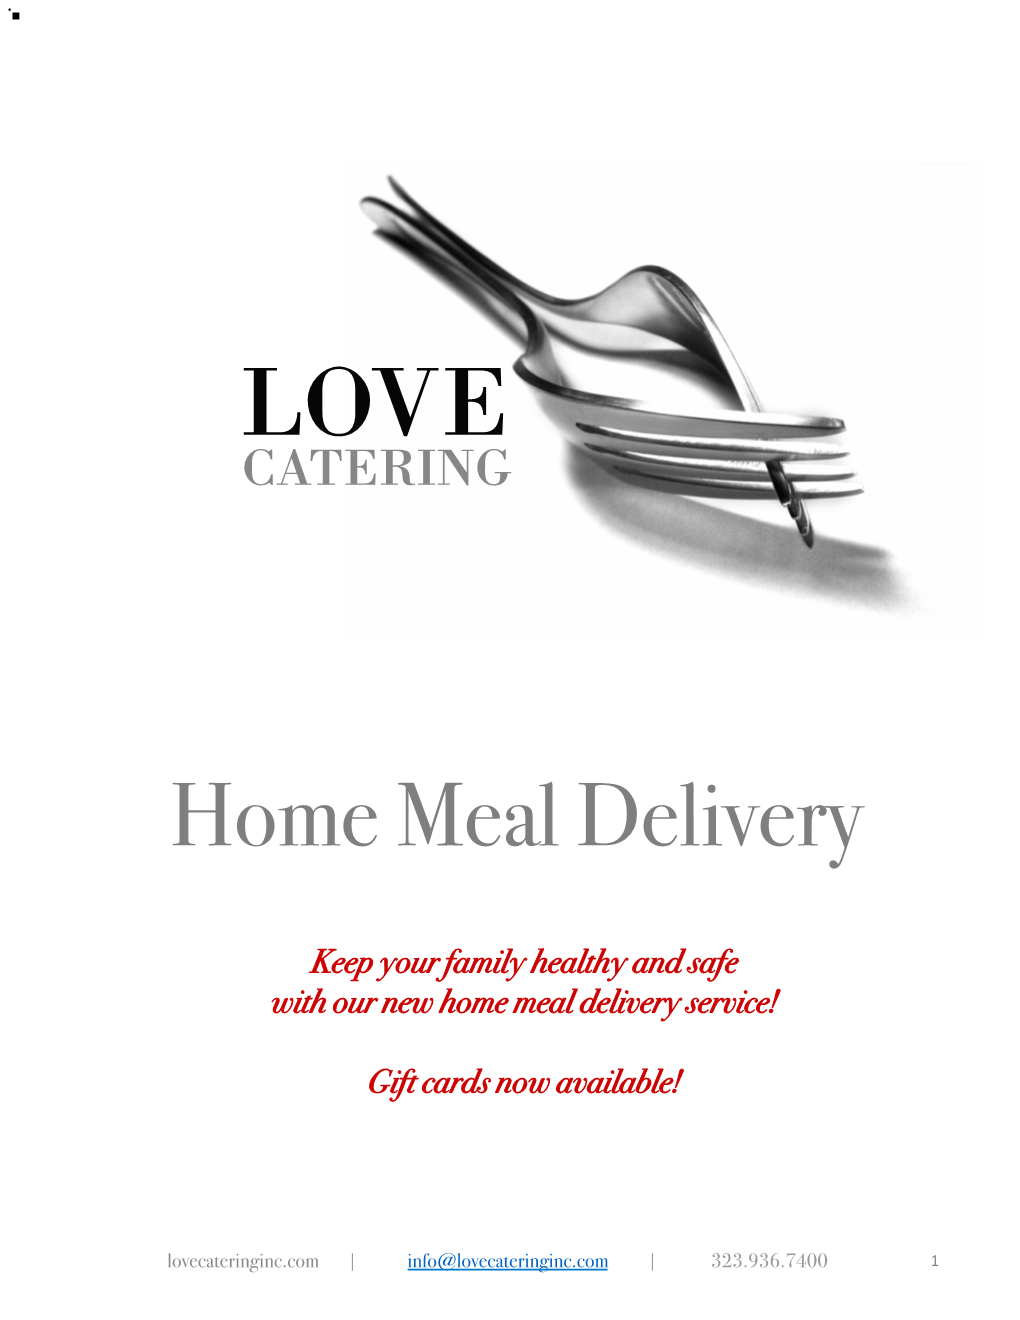 Home Meal Delivery Powerpoint